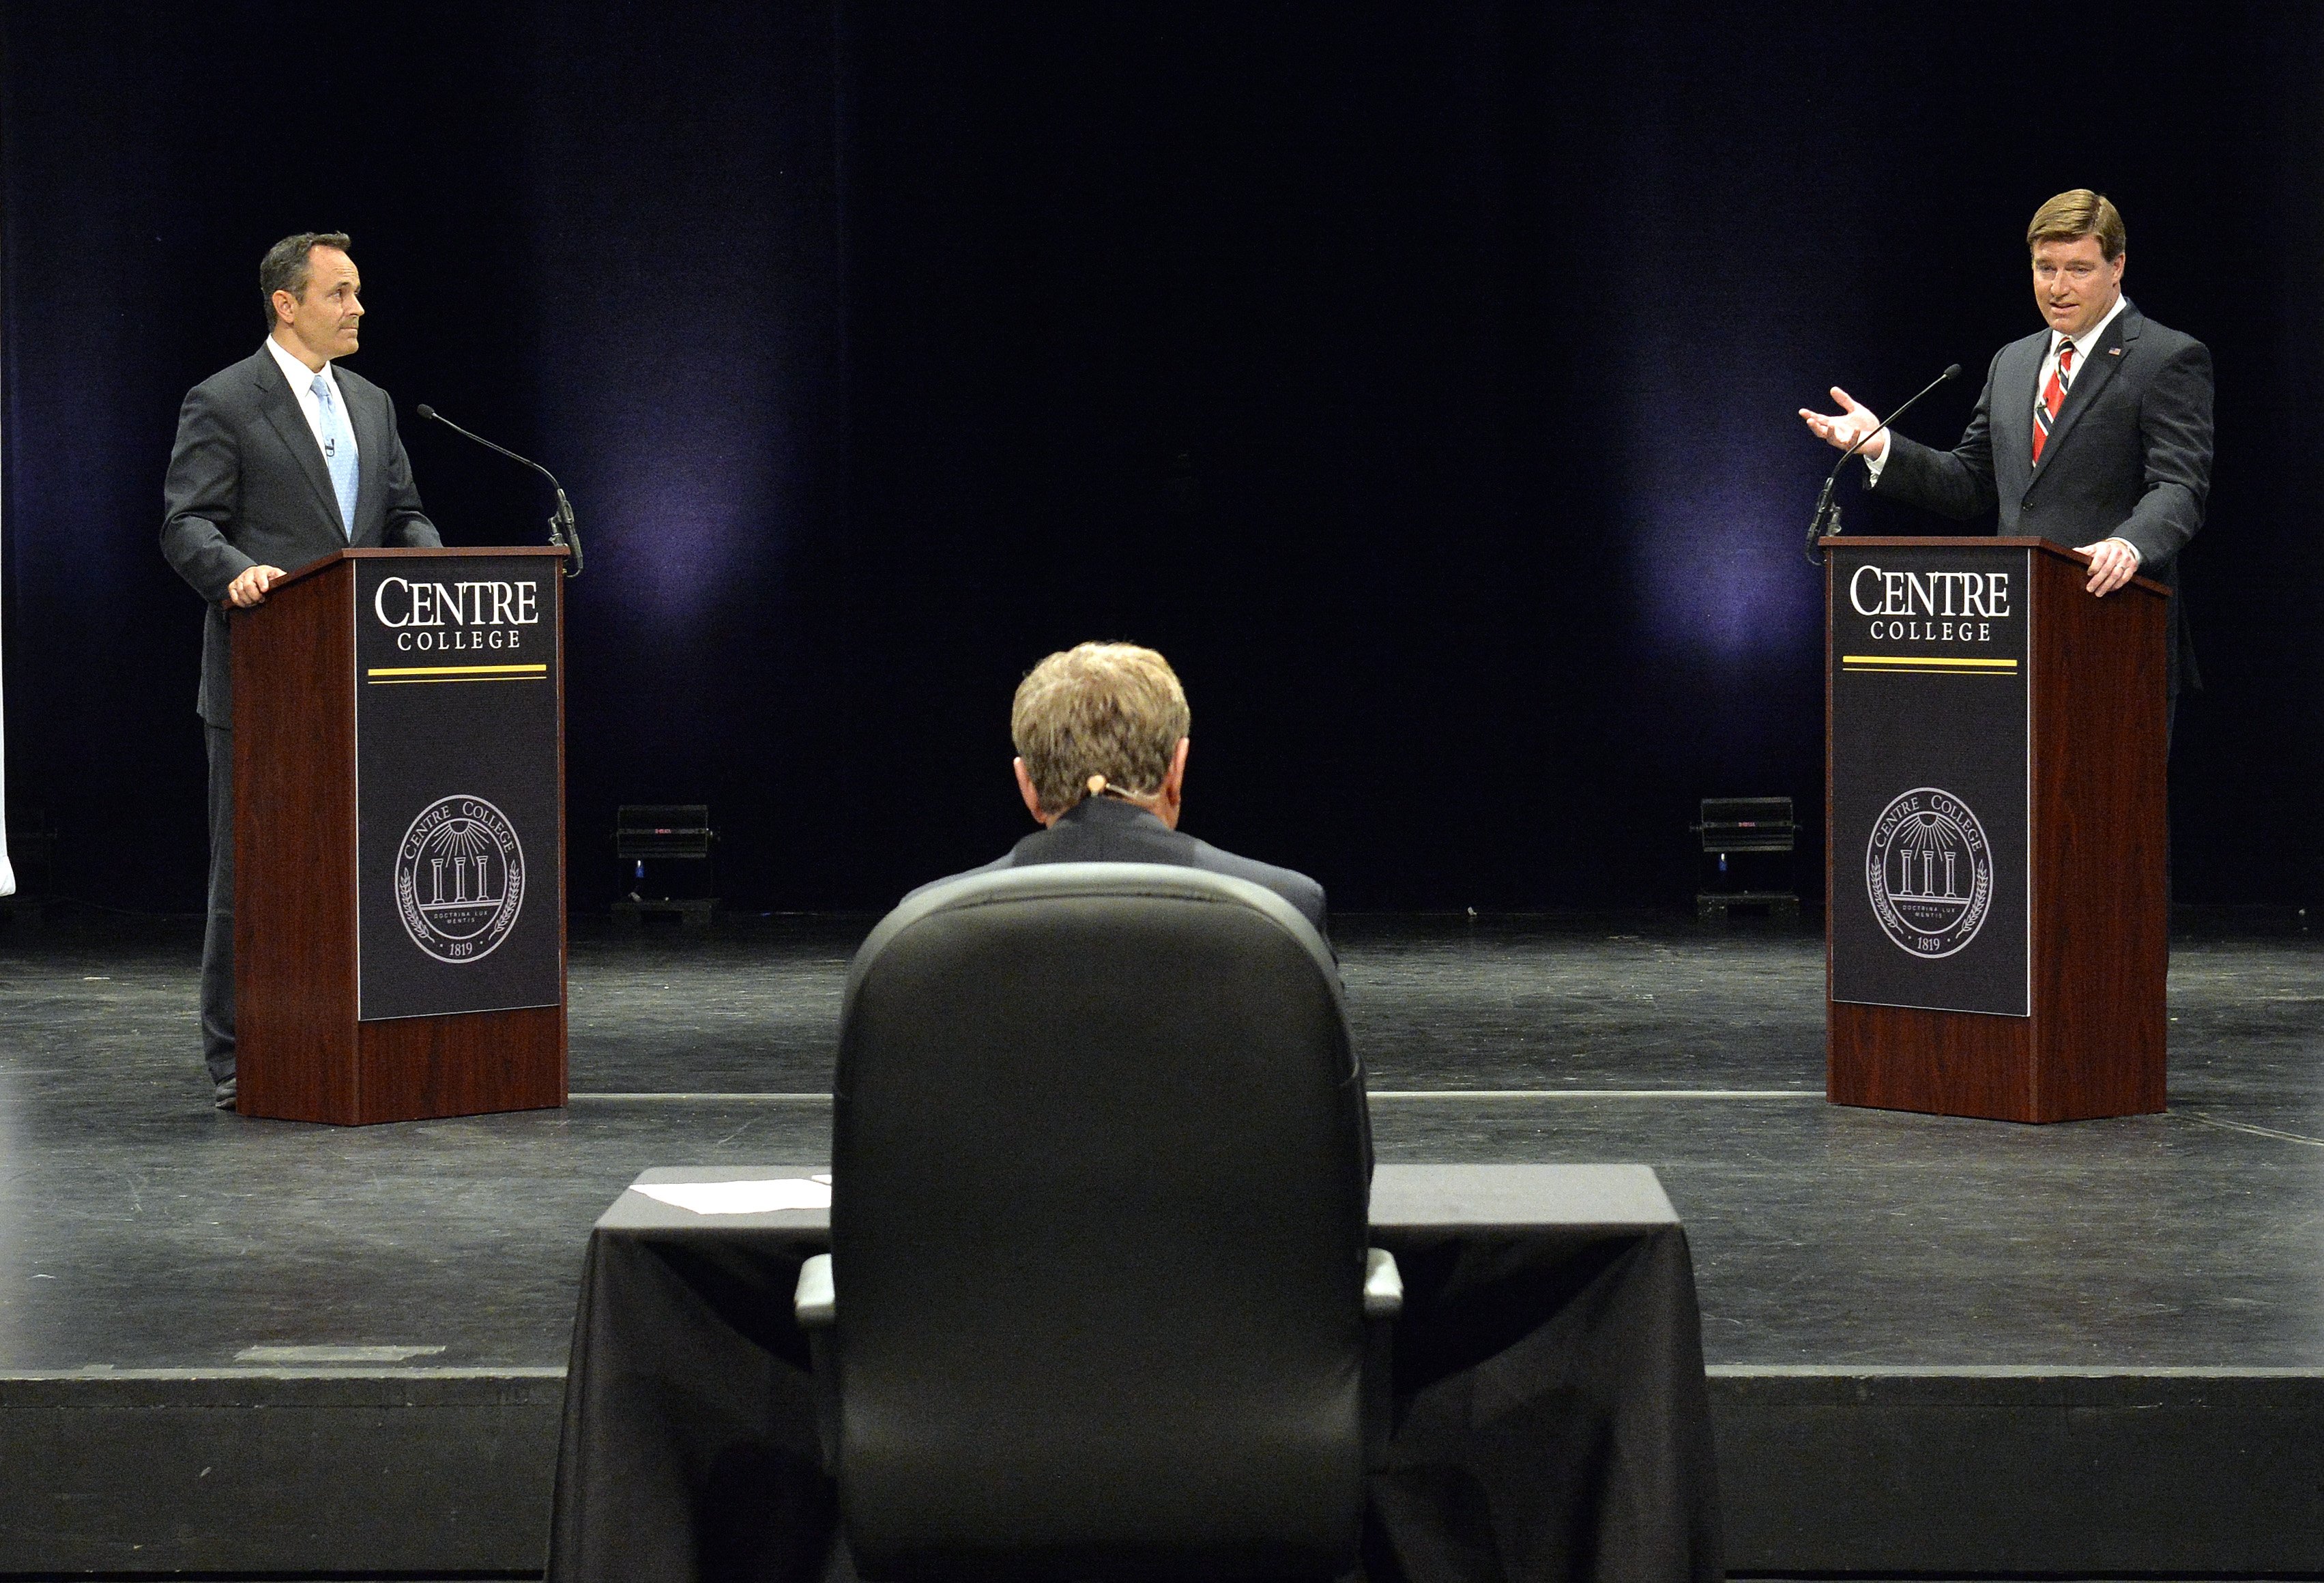 Kentucky Democratic gubernatorial candidate Jack Conway, right, responds to a question from the moderator, as his opponent, Republican Matt Bevin Looks on during the 2015 Kentucky Gubernatorial Debate hosted by Centre College on Oct. 6, 2015, in Danville, Ky. (Timothy D. Easley—AP)